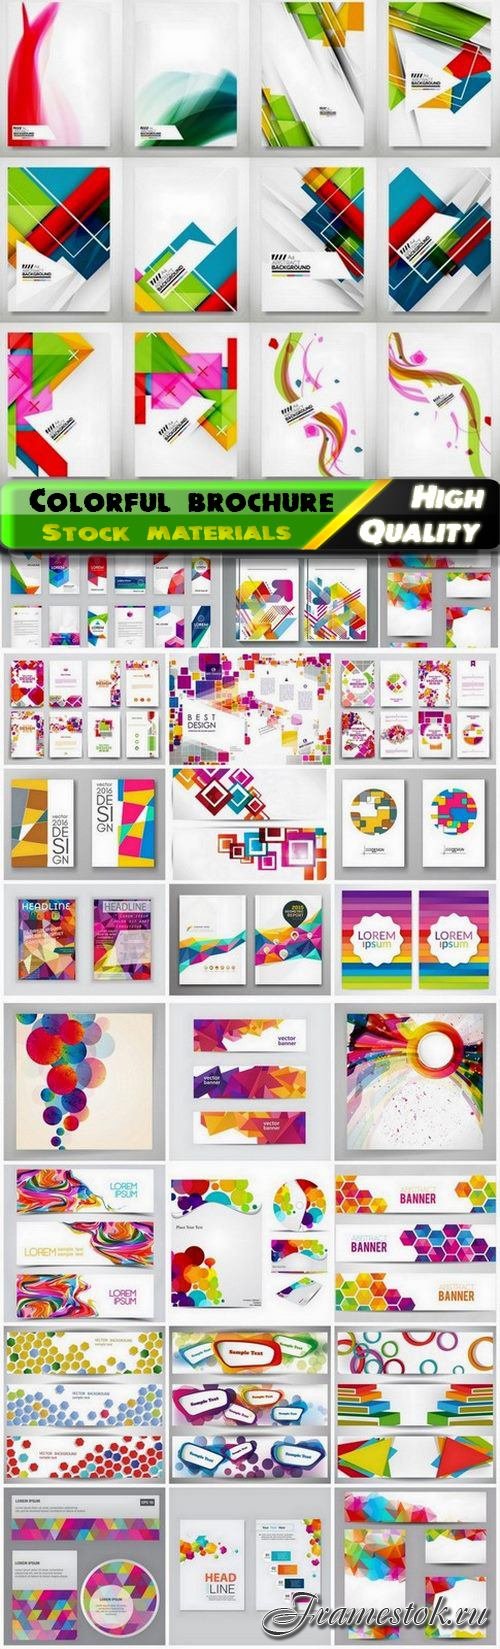 Colorful brochure banner business card template - 25 Eps